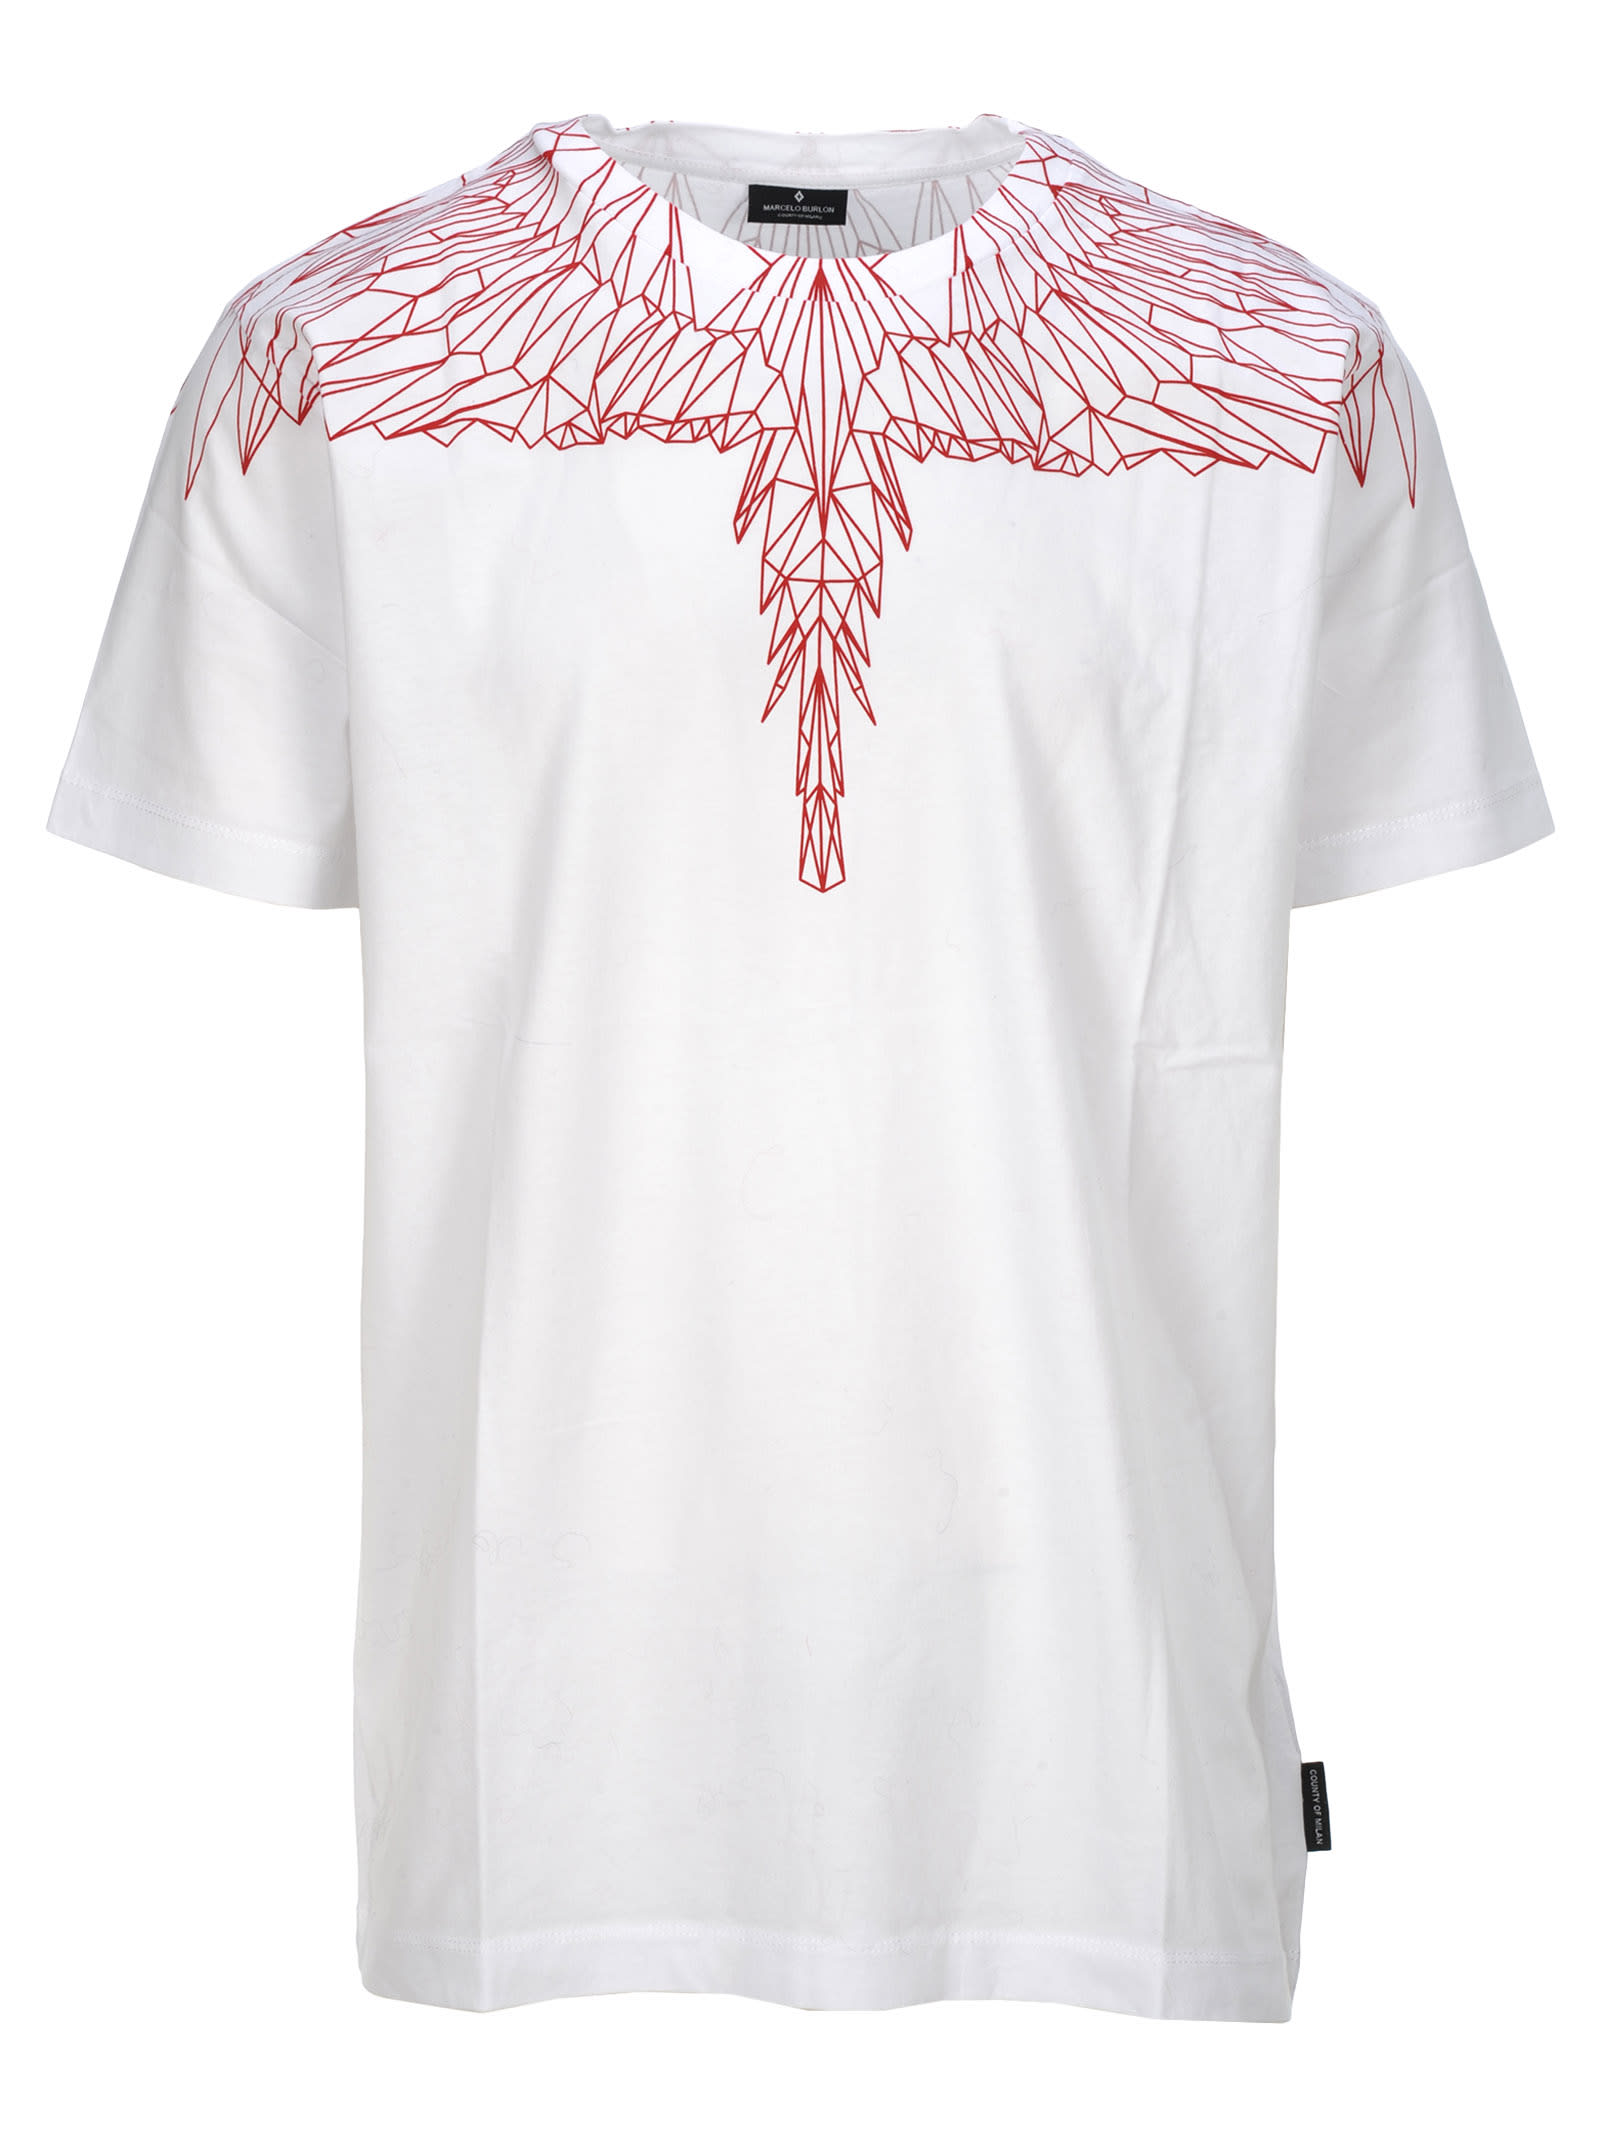 deltage Uskyld Mindre Marcelo Burlon County Of Milan Red Wings Print T-shirt In White/red |  ModeSens